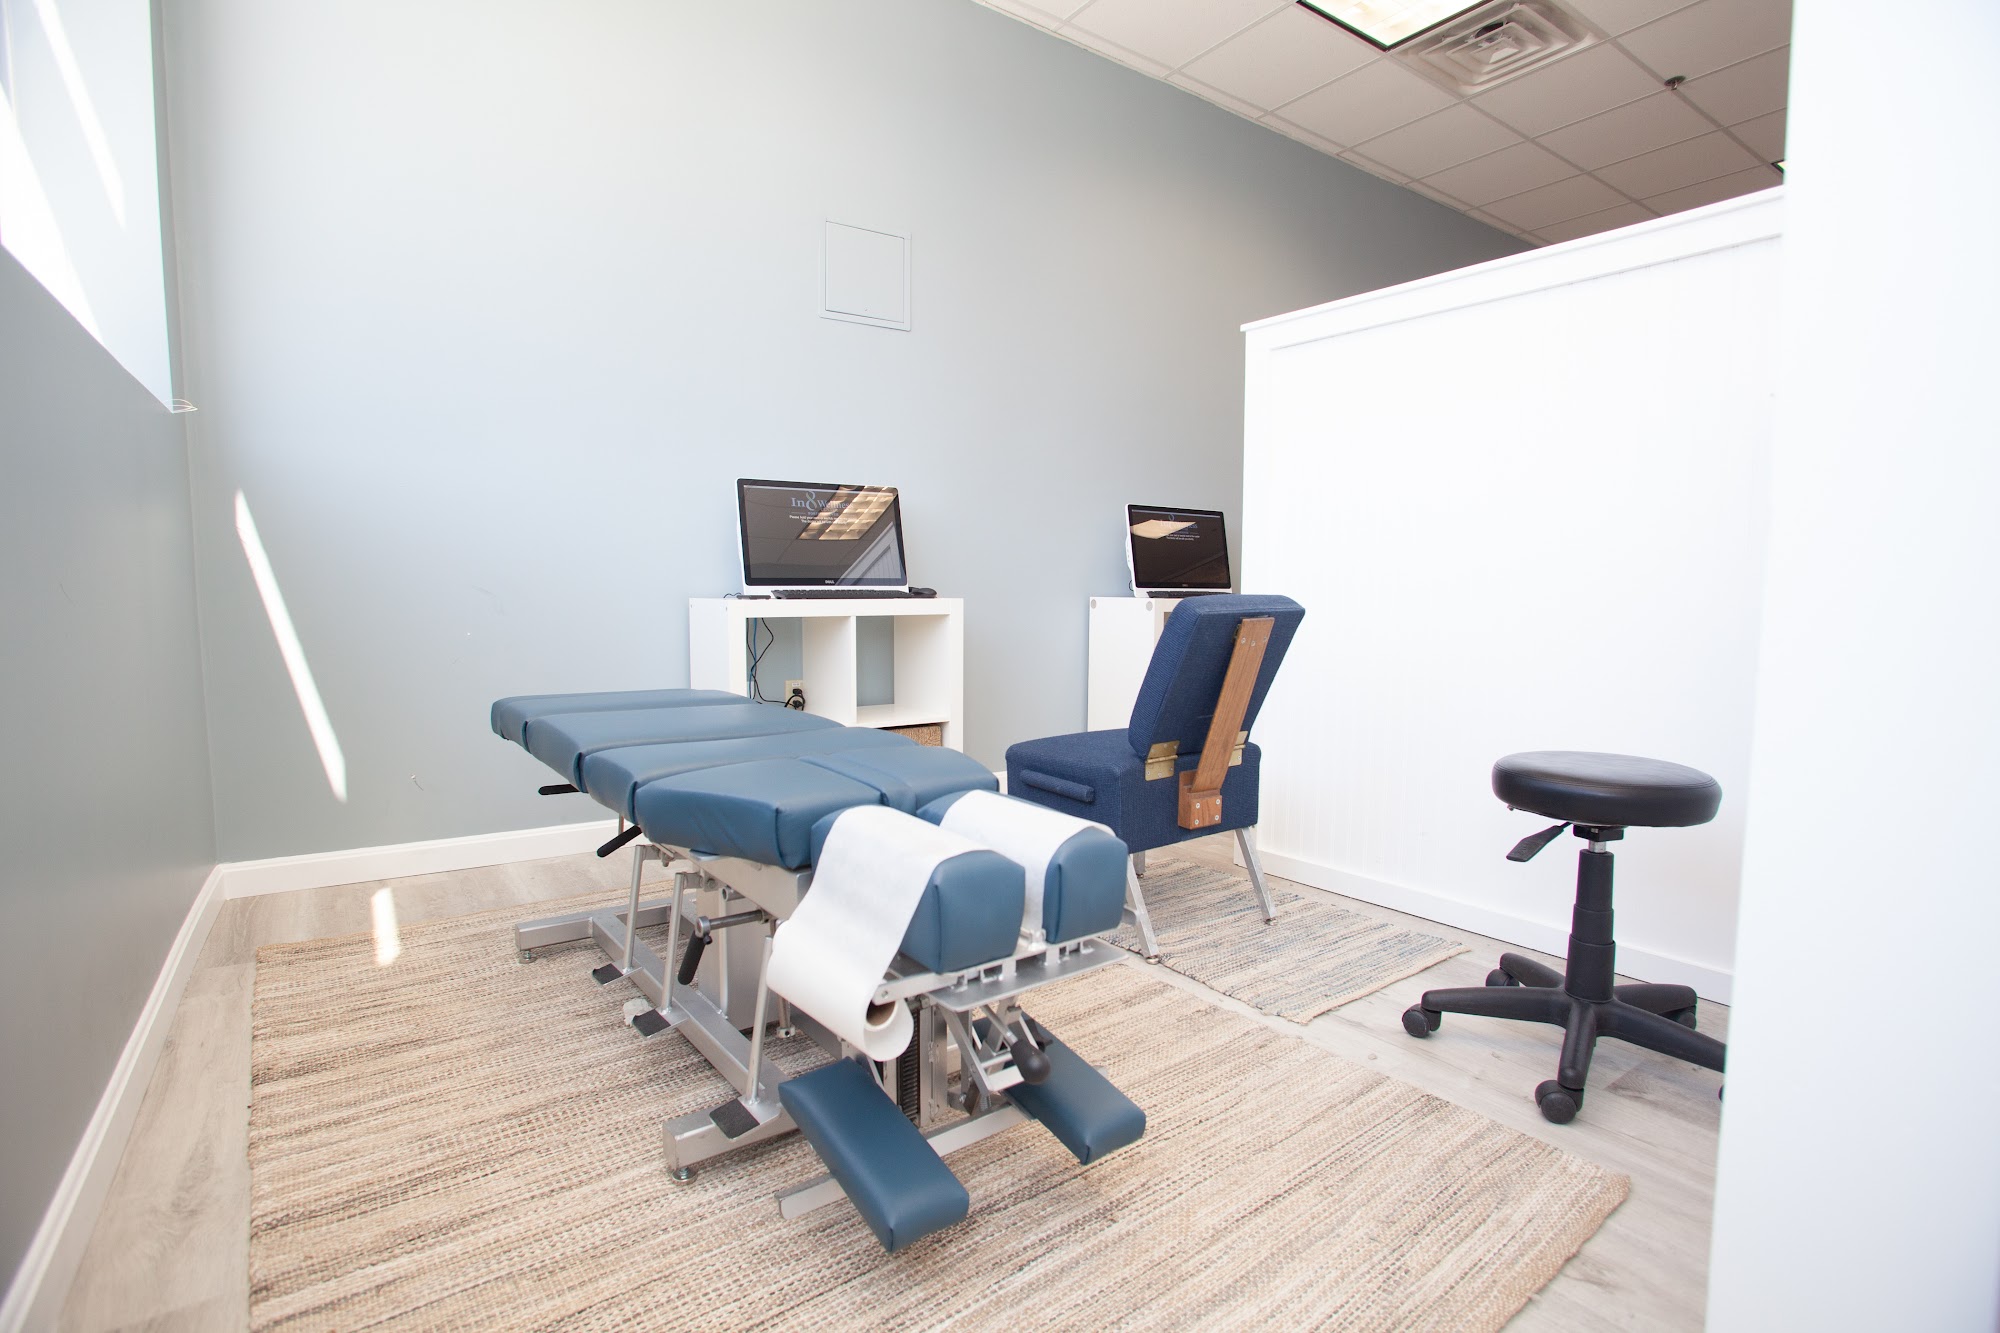 In8 Chiropractic Wellness Center- North Andover